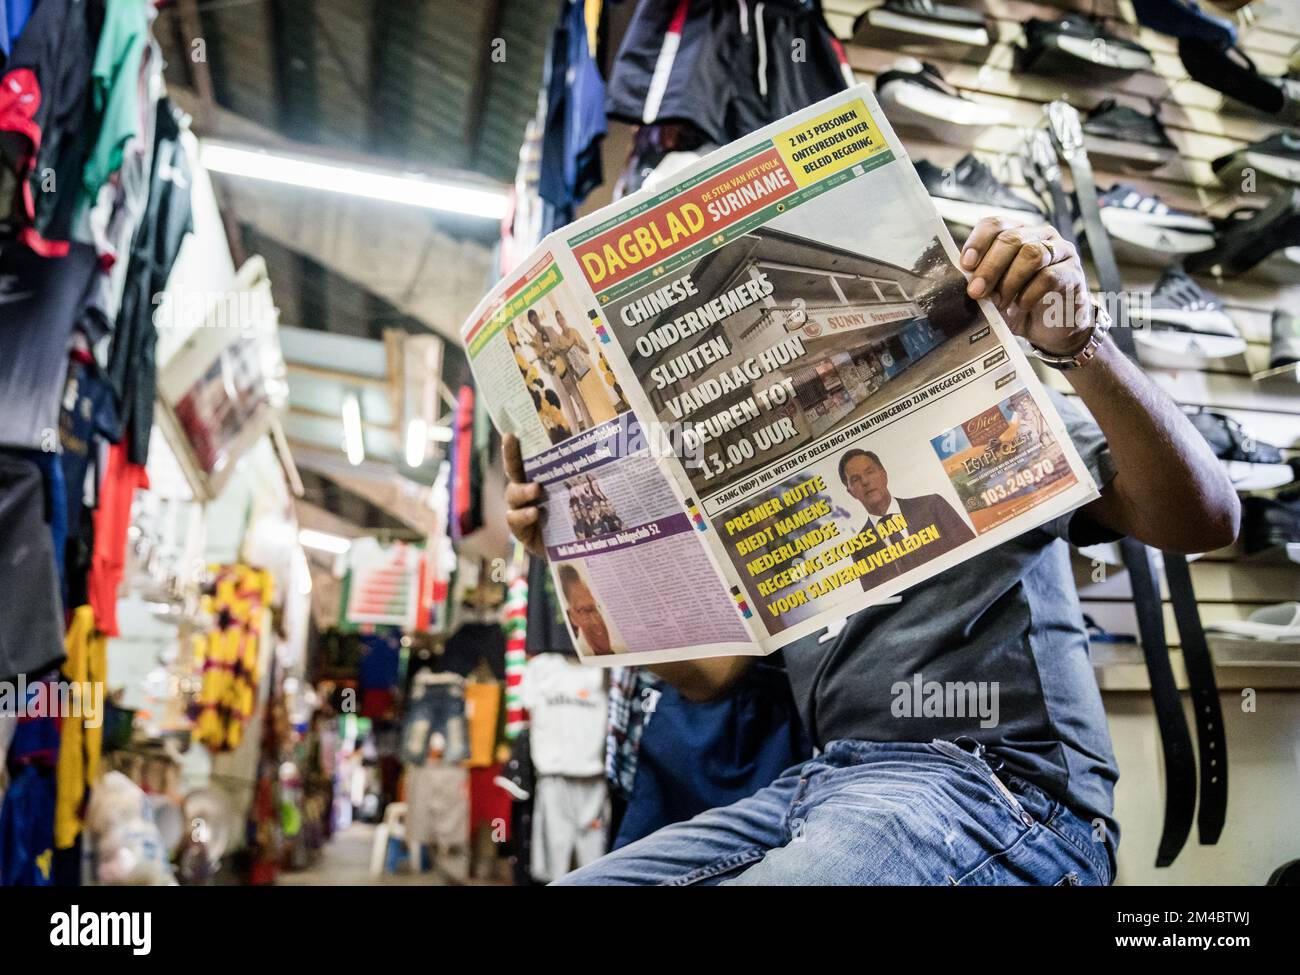 PARAMARIBO - A man reads the Dagblad Suriname on the Central Market in  Paramaribo. On the front page is a photo of Prime Minister Mark Rutte. ANP  BART MAAT netherlands out -